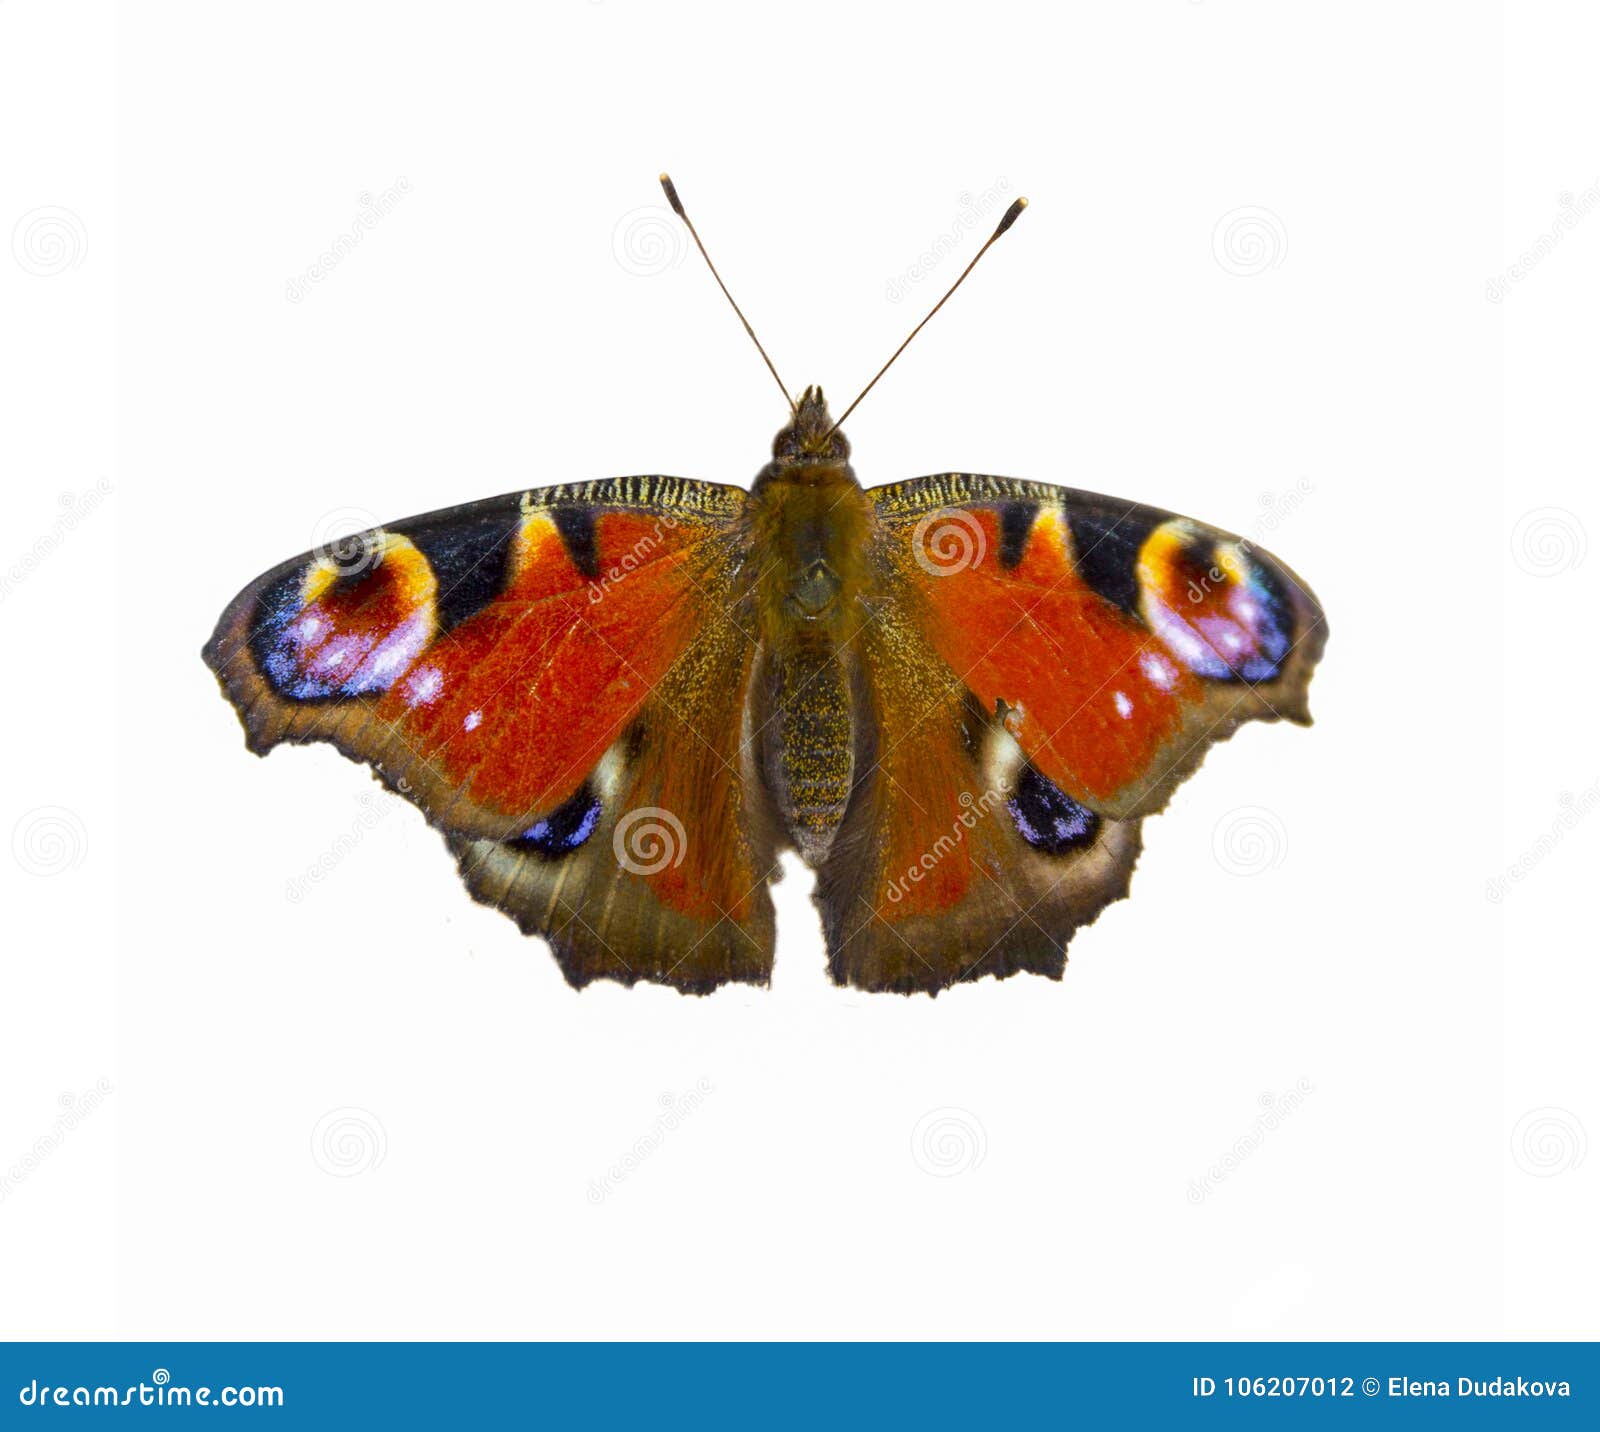 The Butterfly of Peacock Eye on a White Background Stock Photo - Image ...